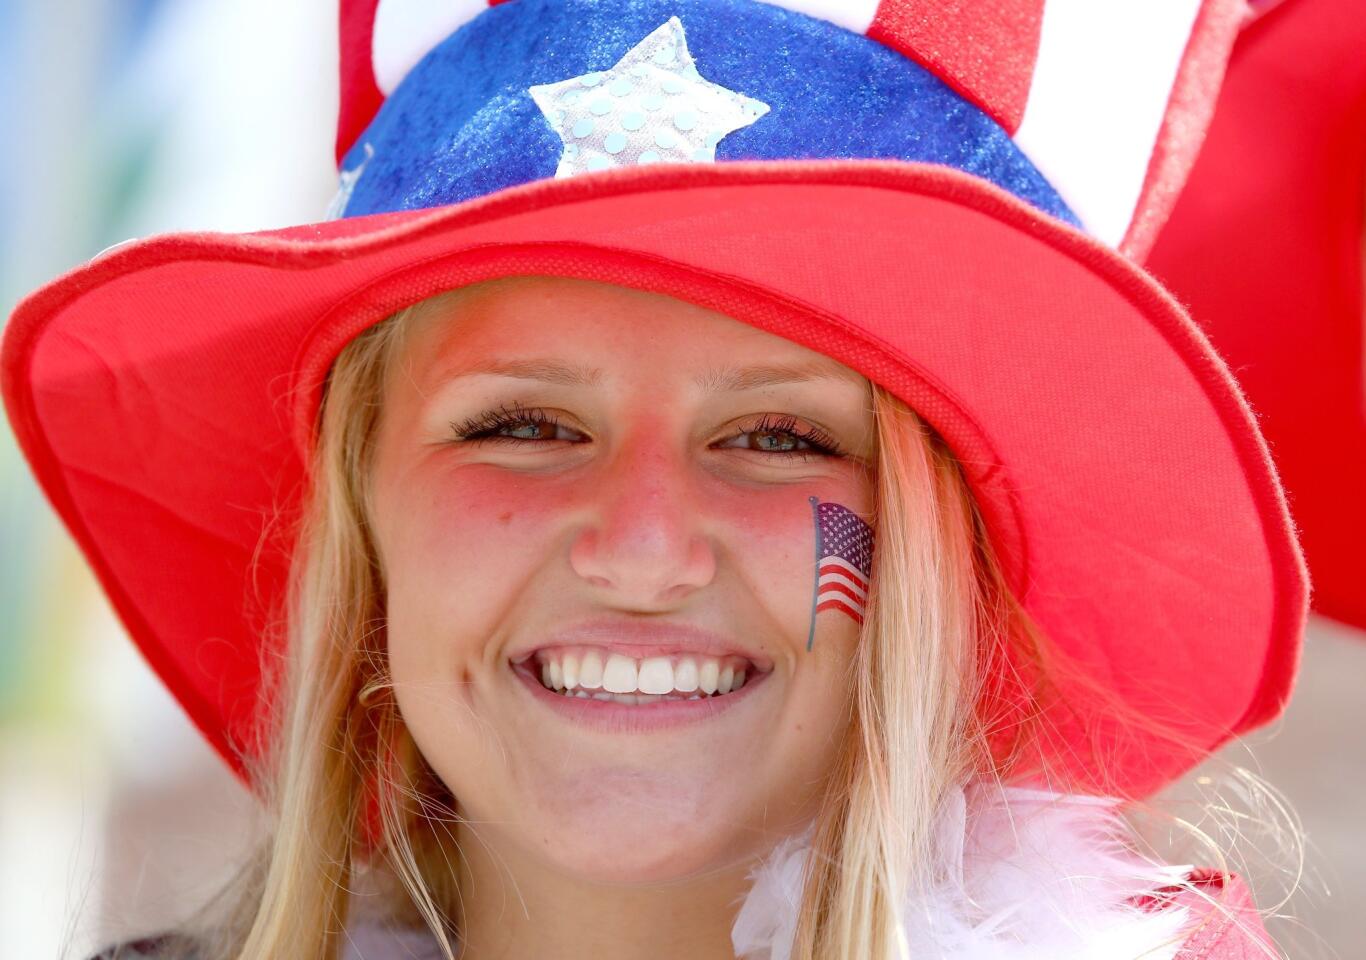 VANCOUVER, BC - JULY 05: A fan of the United States poses outside BC Place Stadium before the USA takes on Japan in the FIFA Women's World Cup Canada 2015 Final on July 5, 2015 in Vancouver, Canada. (Photo by Ronald Martinez/Getty Images) ** OUTS - ELSENT, FPG - OUTS * NM, PH, VA if sourced by CT, LA or MoD **